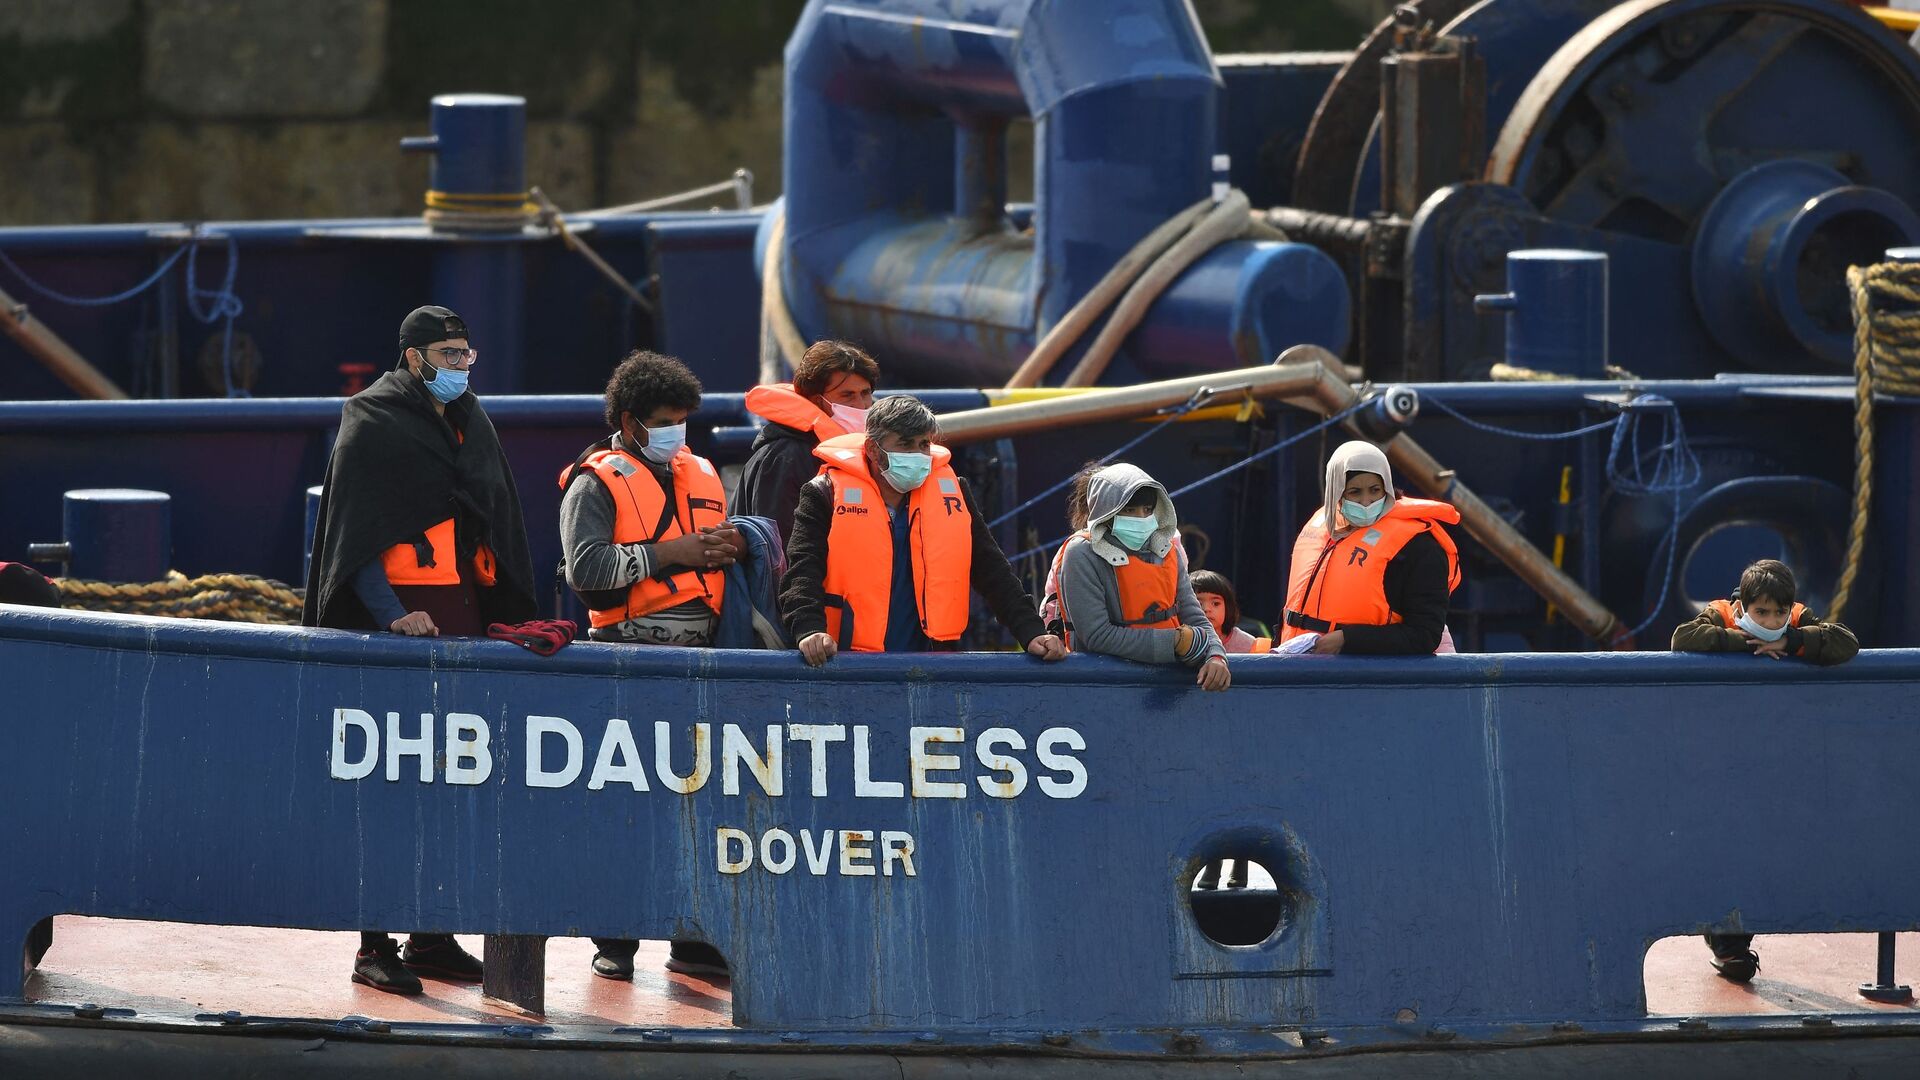 Waleed (3L), 29, a Kuwaiti migrant, stands with other migrants onboard the DHB Dauntless tug boat as they are brought to shore by the UK Border Force after illegally crossing the English Channel from France on a dinghy on September 11, 2020, in the marina at Dover, on the south coast of England - Sputnik International, 1920, 07.09.2021